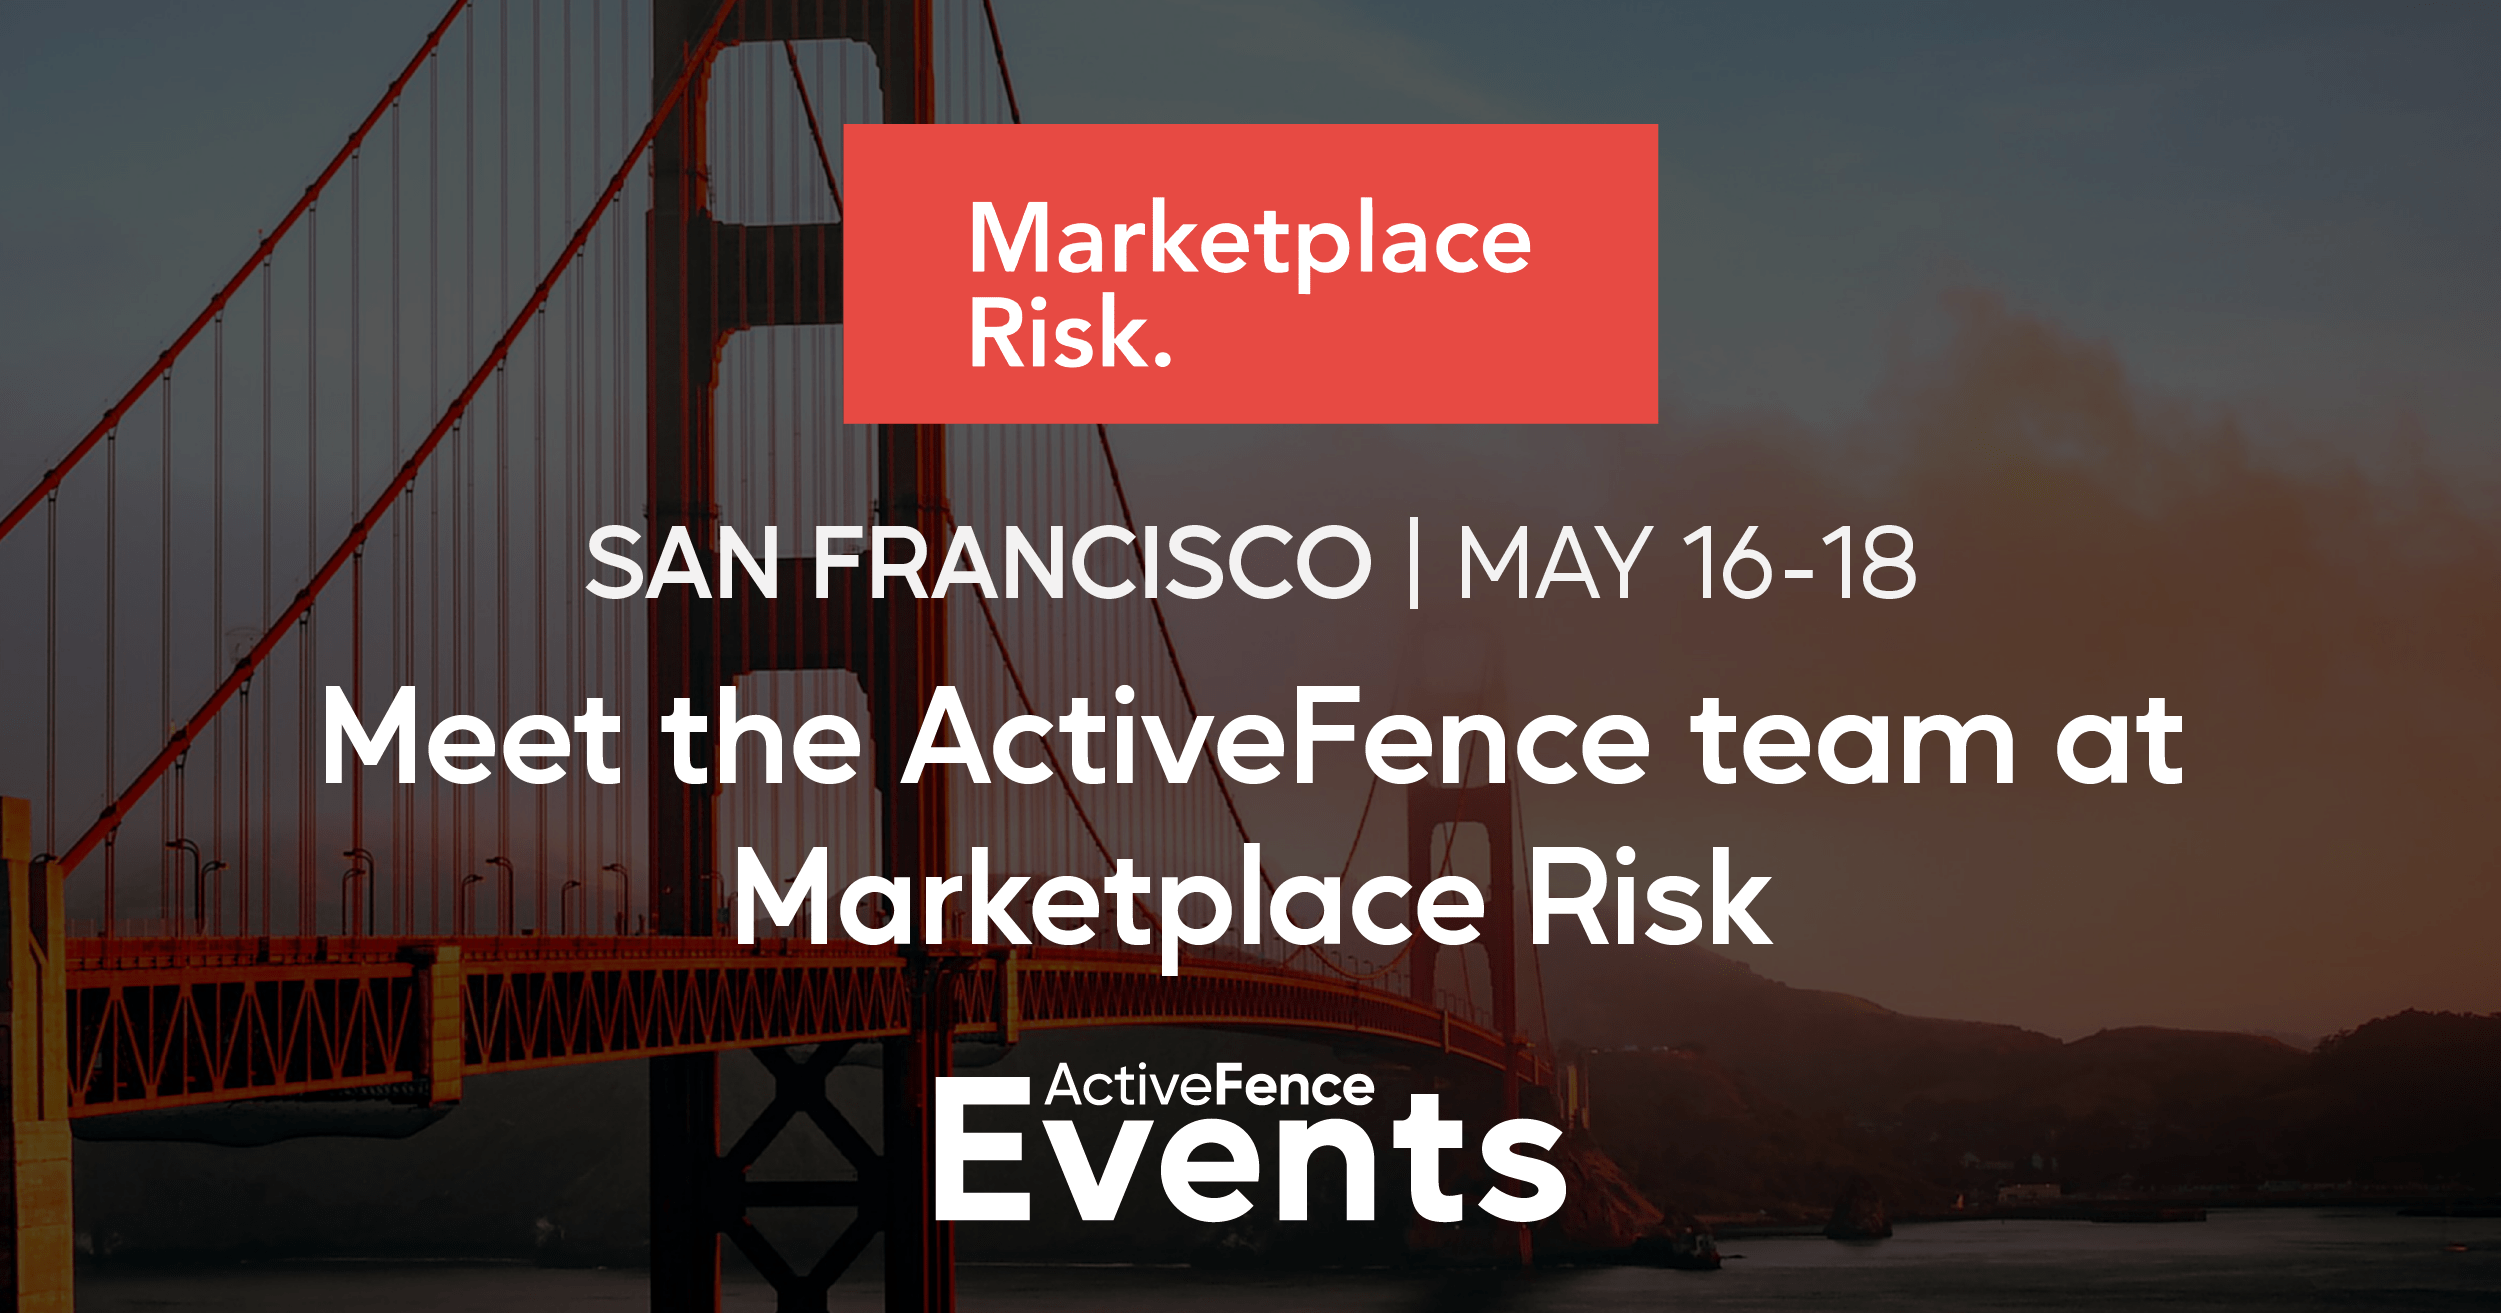 Announcement banner for the Marketplace Risk event in San Francisco from May 16-18, featuring the Golden Gate Bridge in the background and text inviting to meet the ActiveFence team